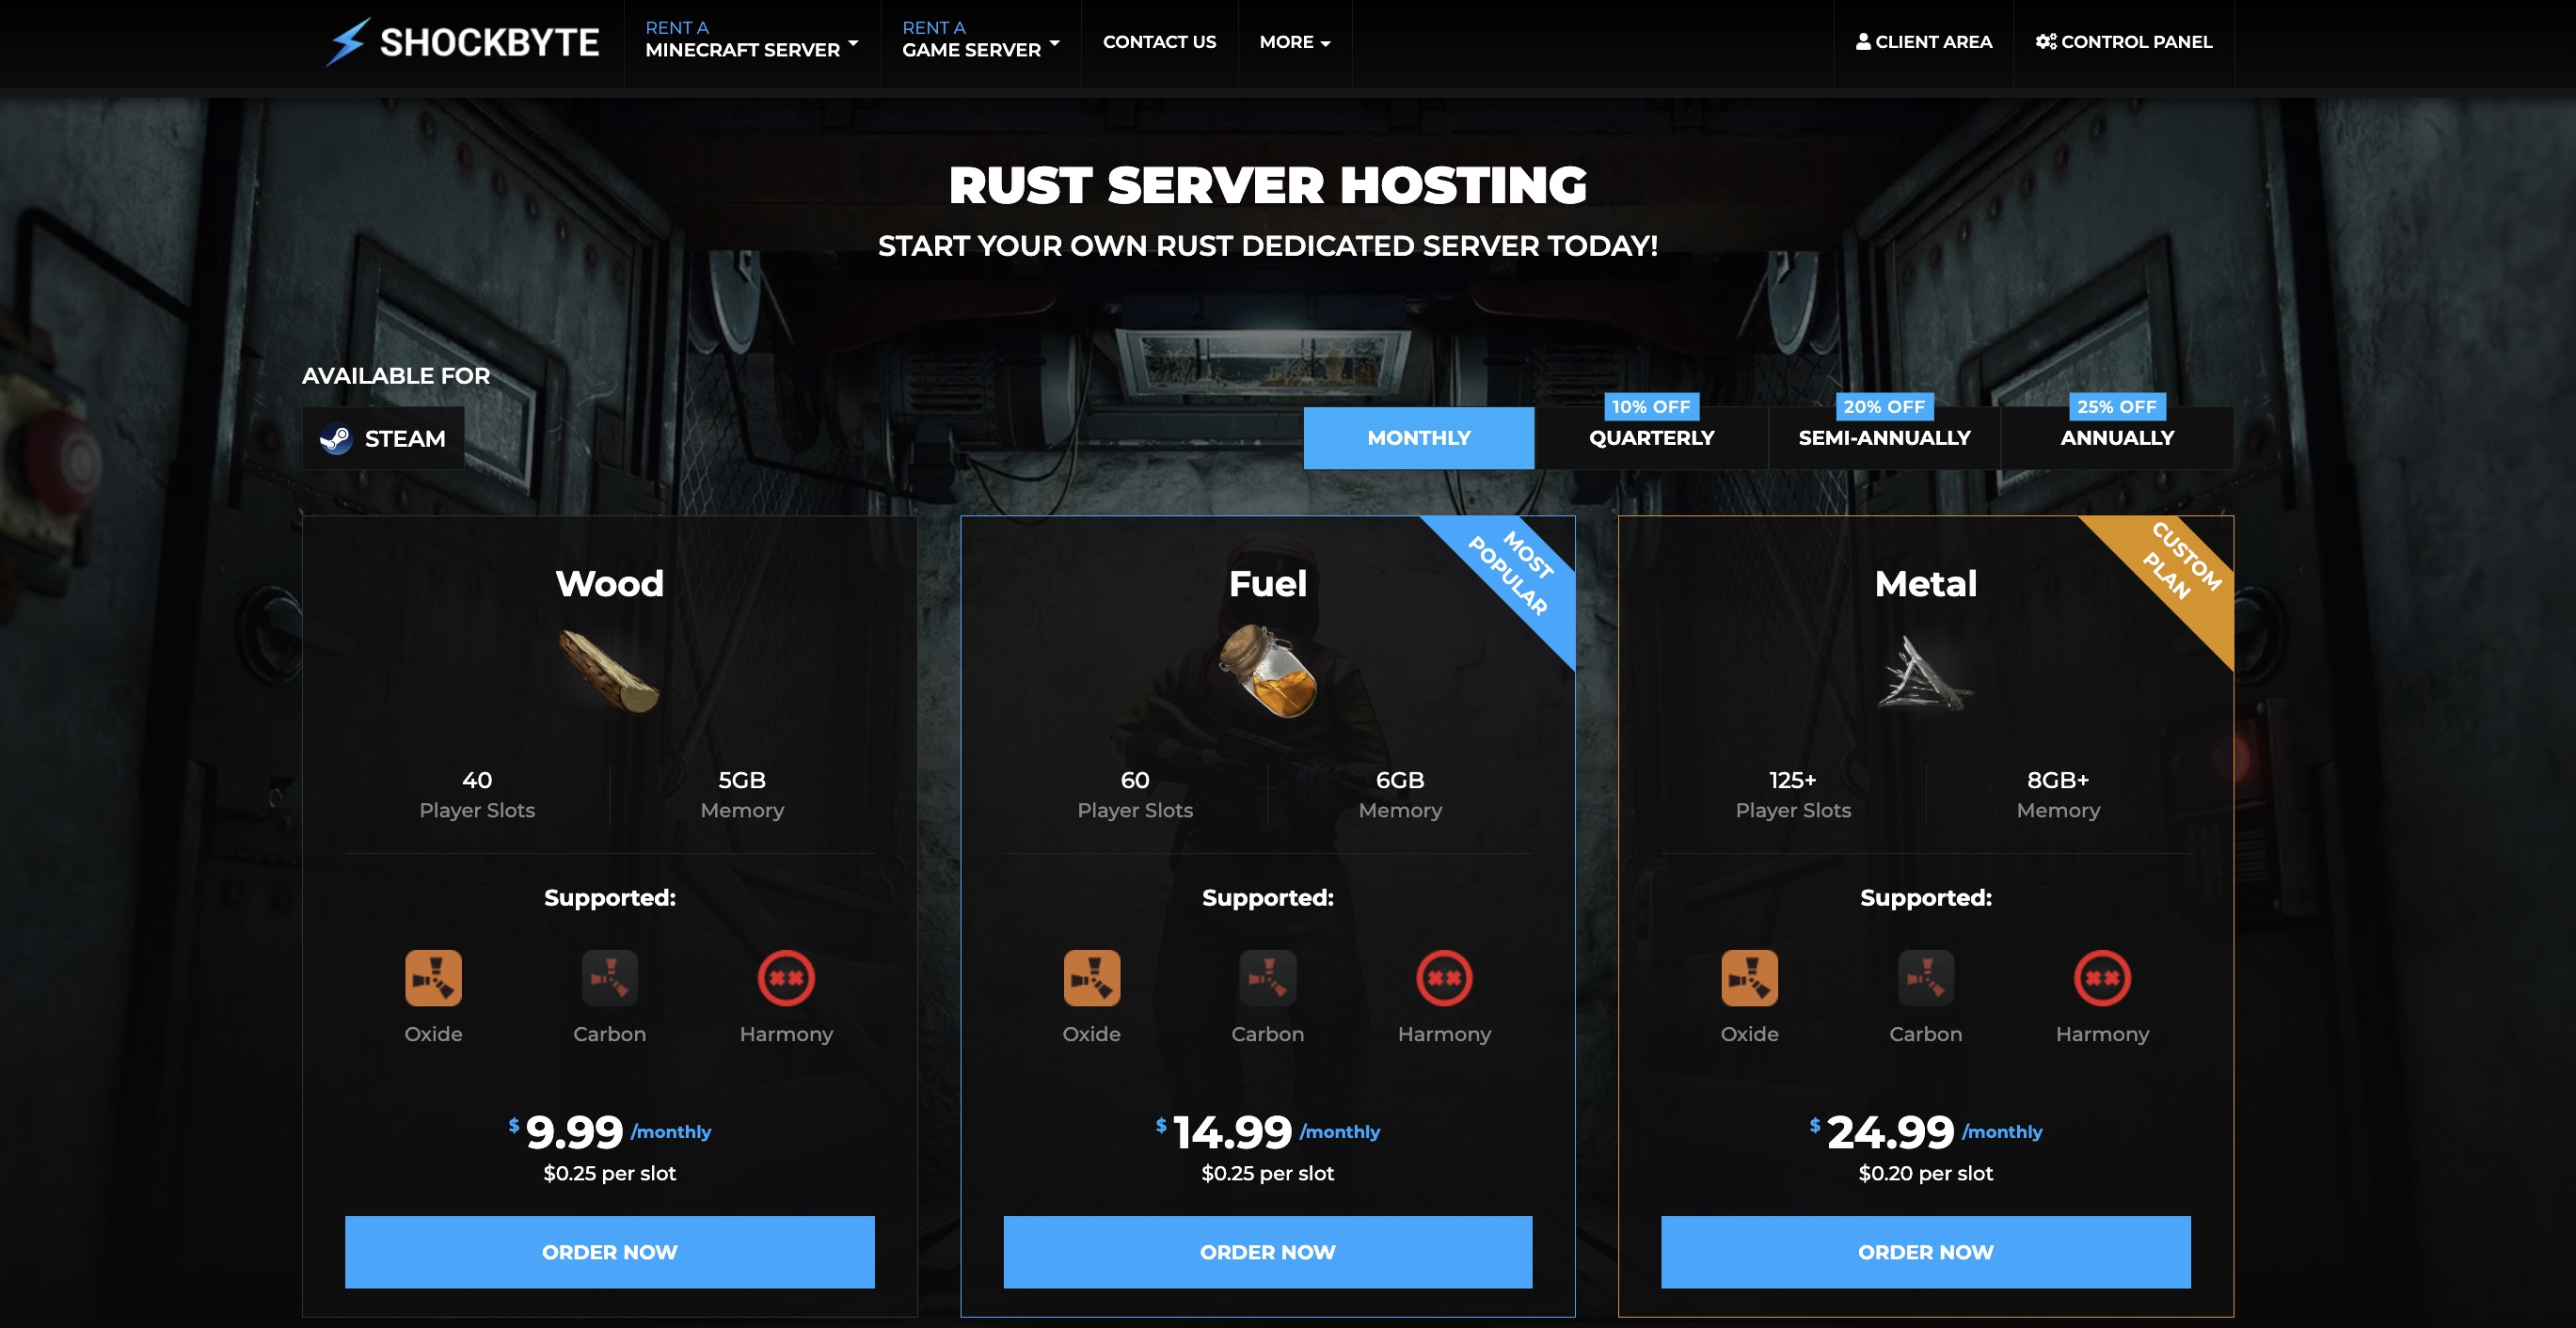 An image of Shockbyte's rust server hosting page